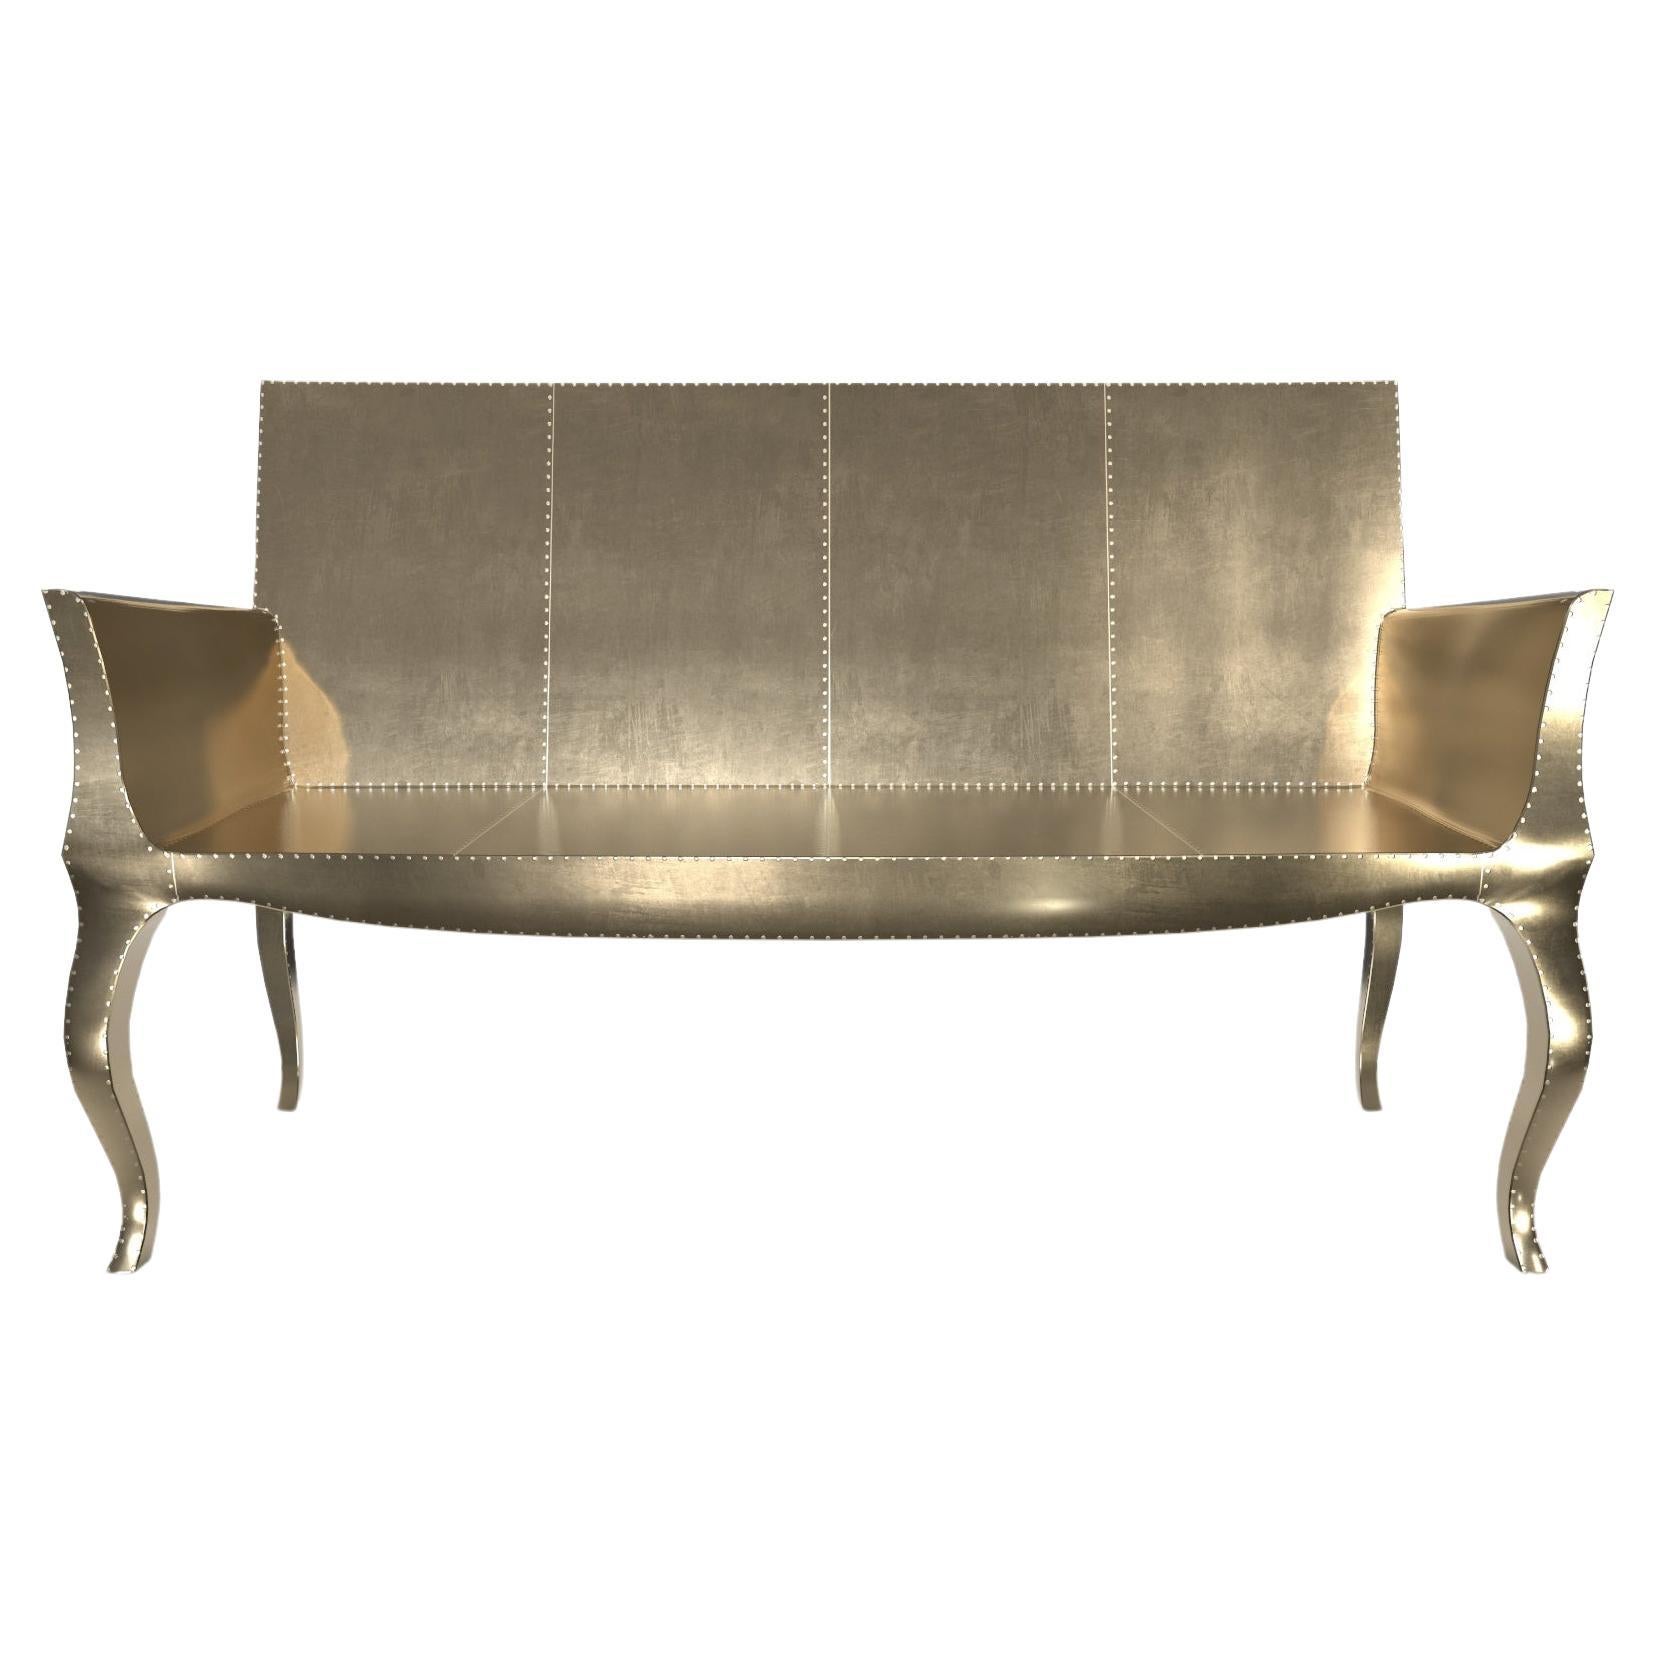 Louise Settee Art Deco Benches in Smooth Brass by Paul Mathieu for S Odegard For Sale